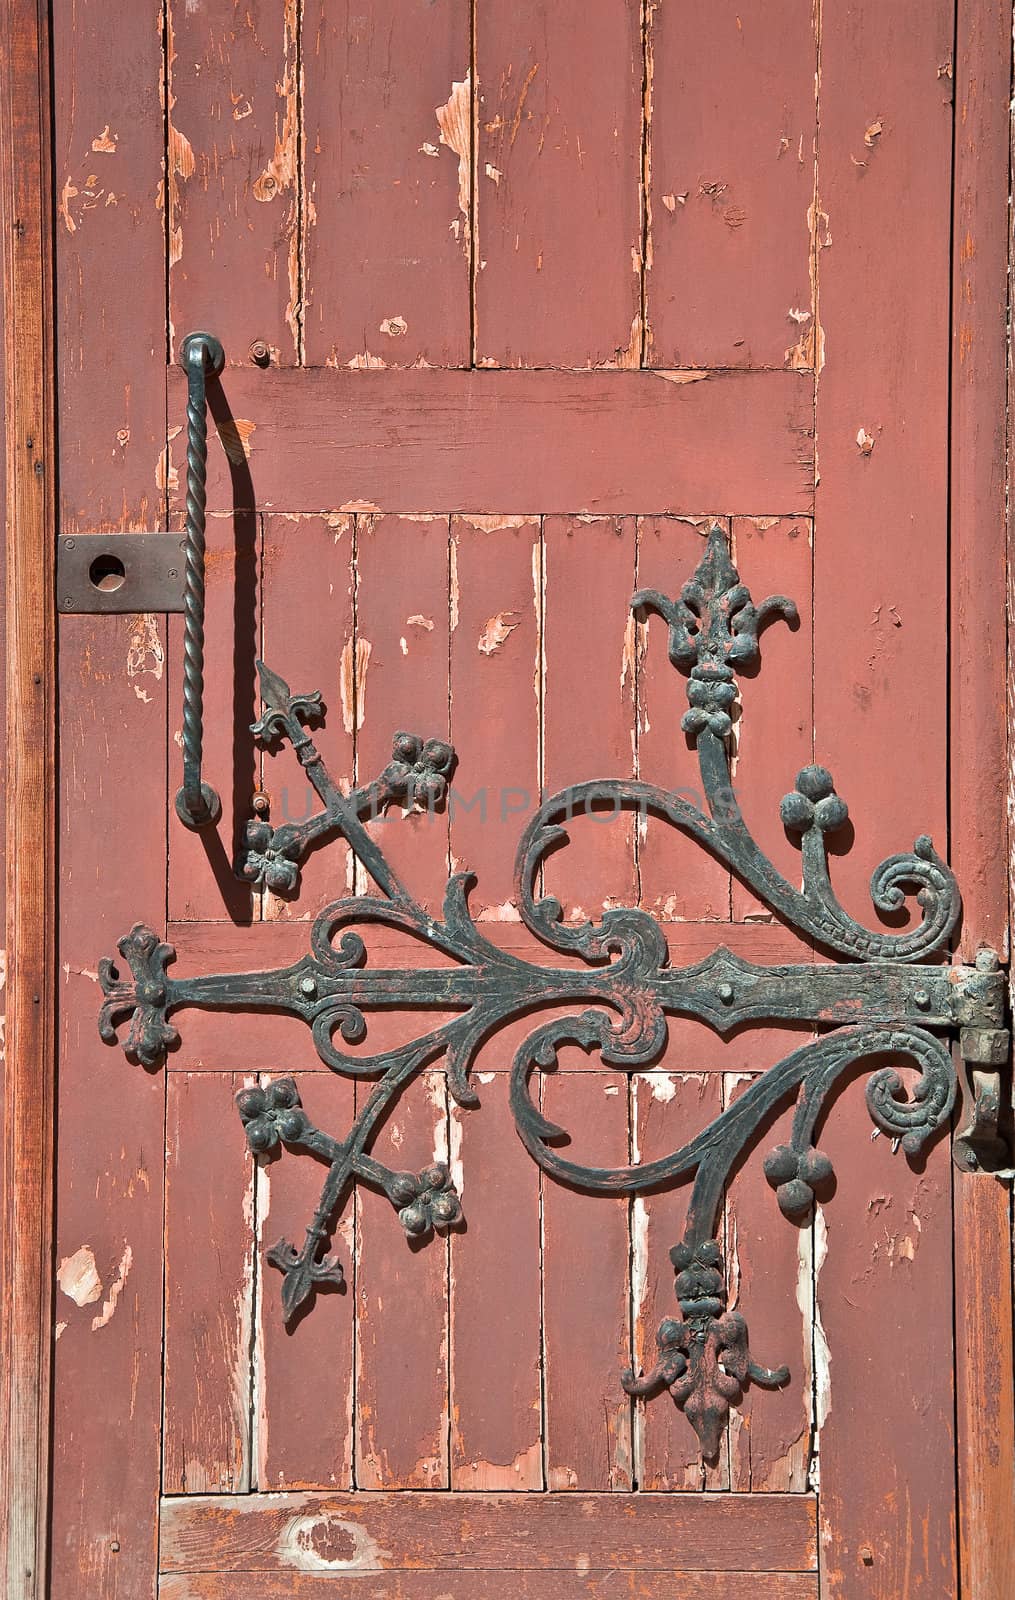 Detail of old wooden door with wrought iron handle. Close-up detail of the architecture.